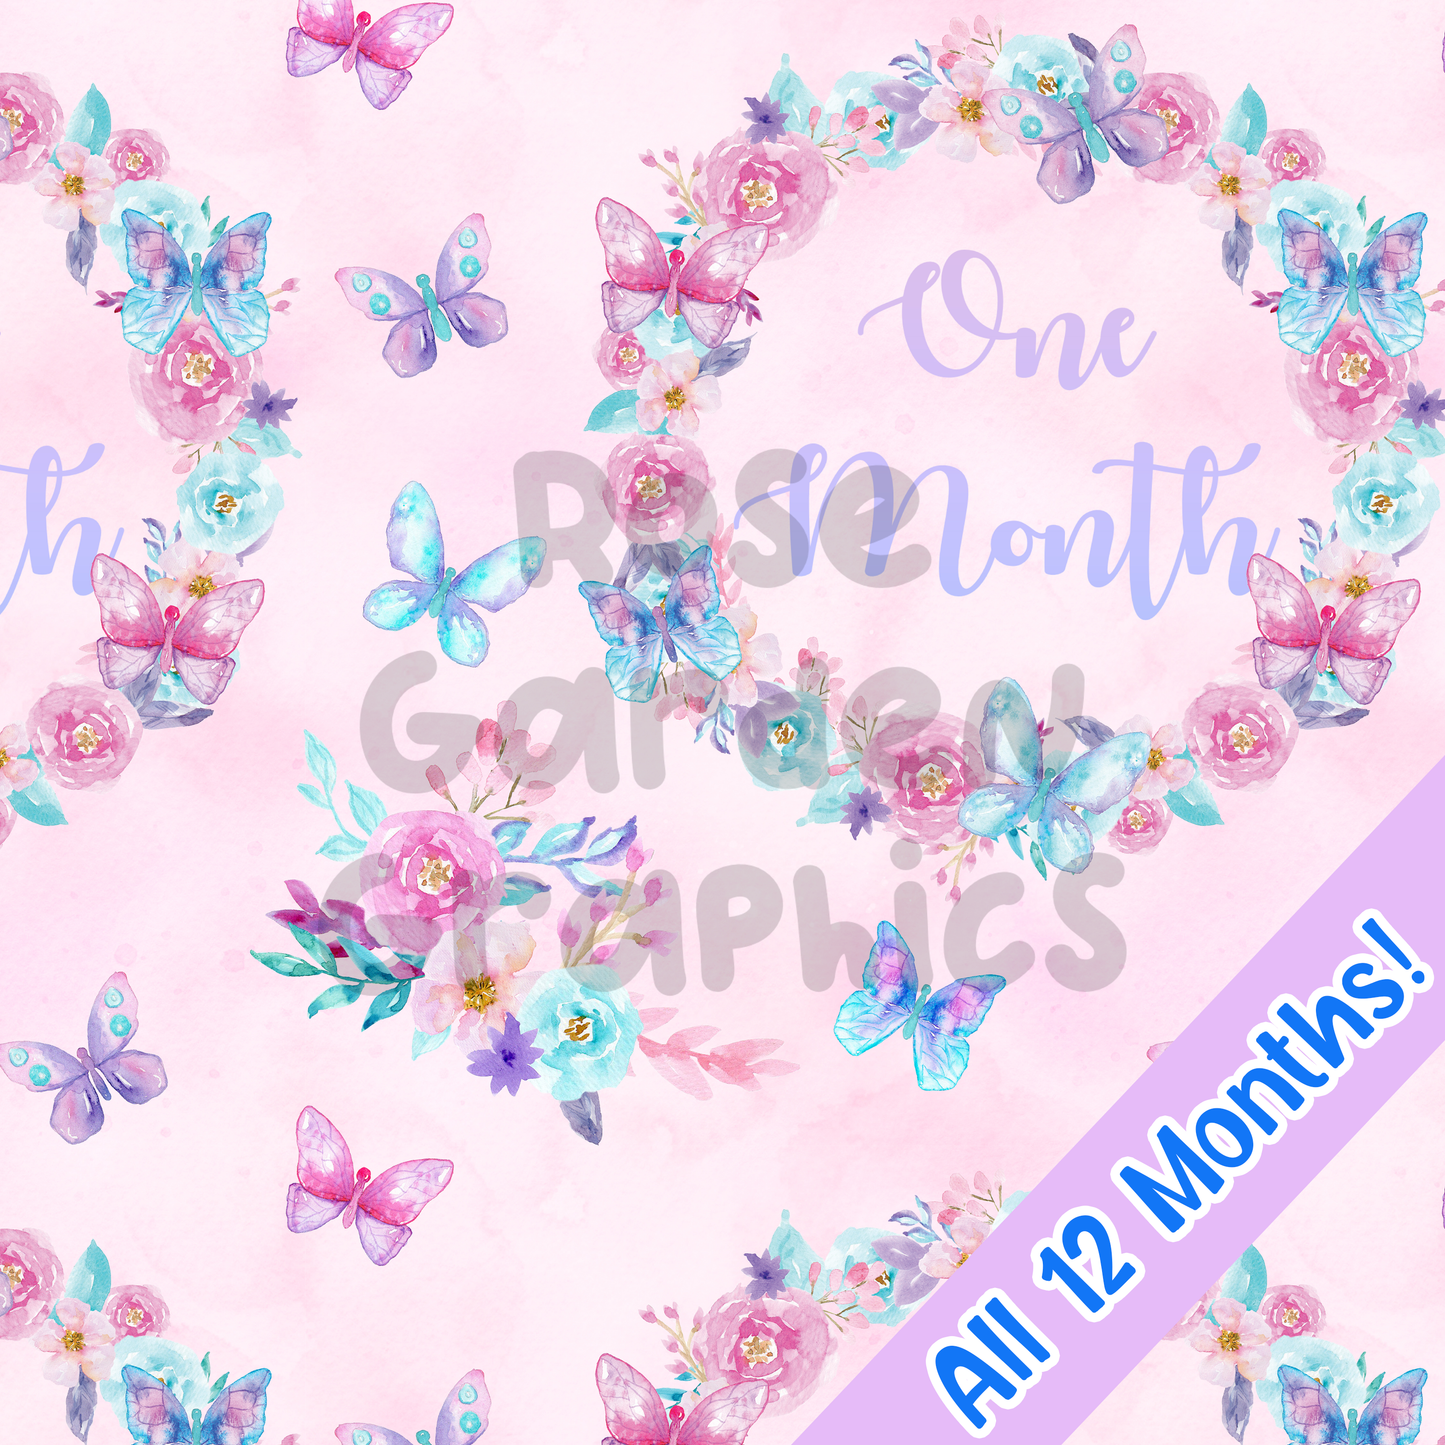 Butterflies Watercolor Milestone Months Seamless Image Collection